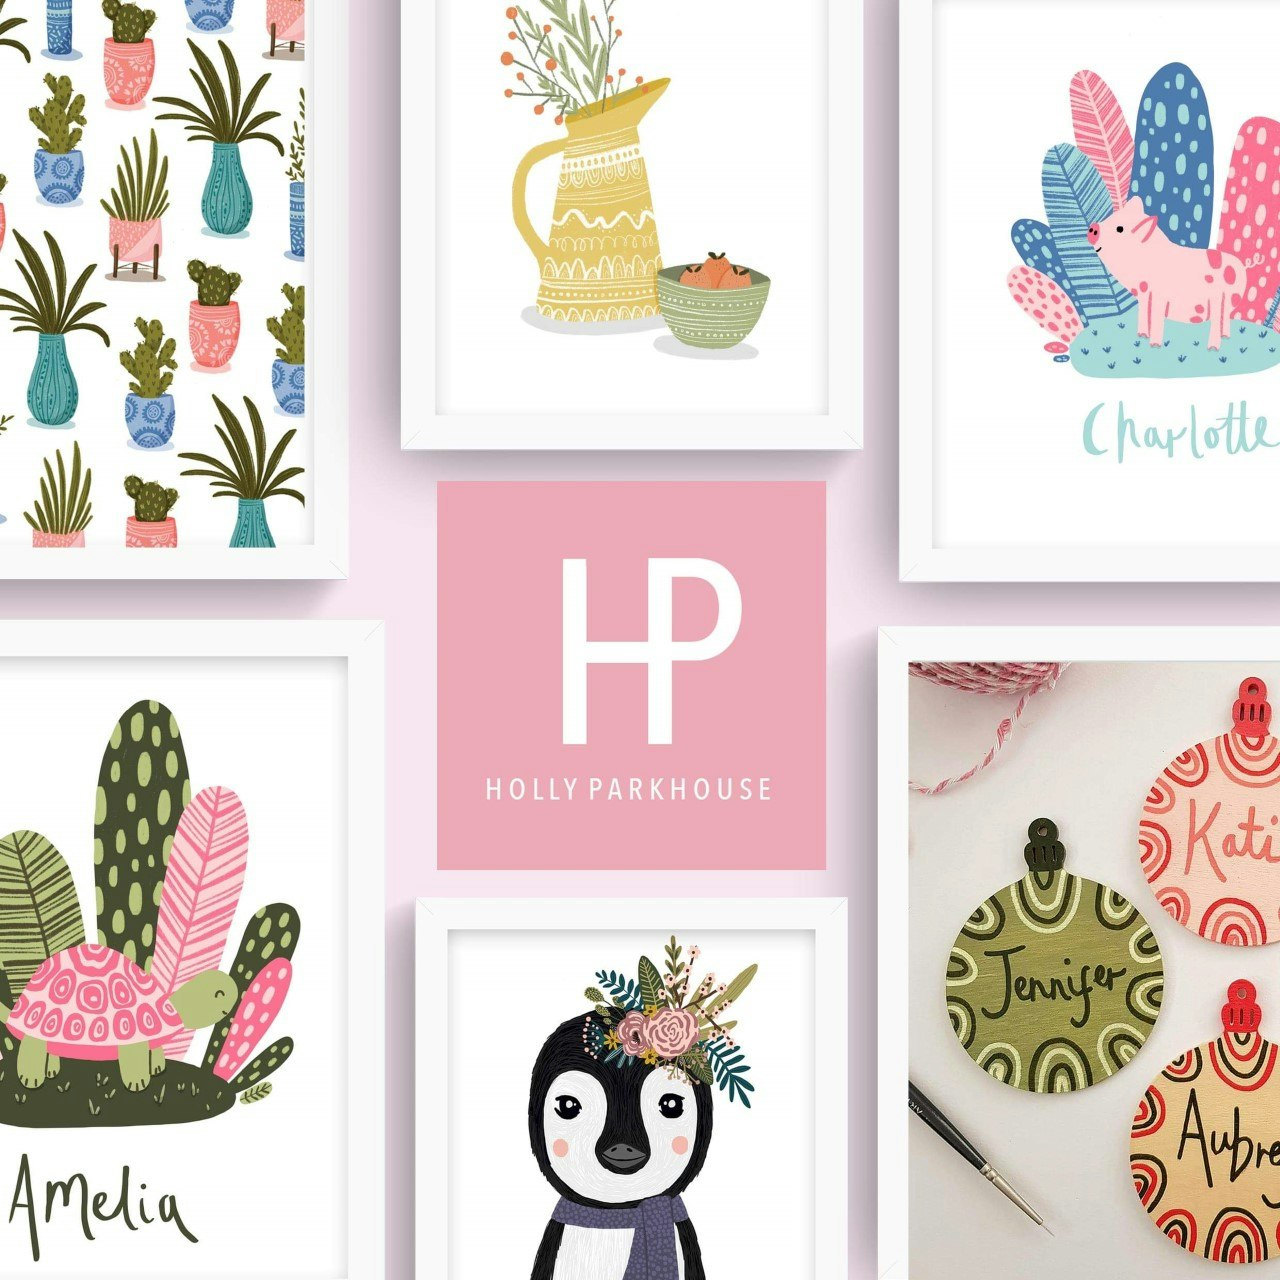 A selection of prints surrounding the Holly Parkhouse logo